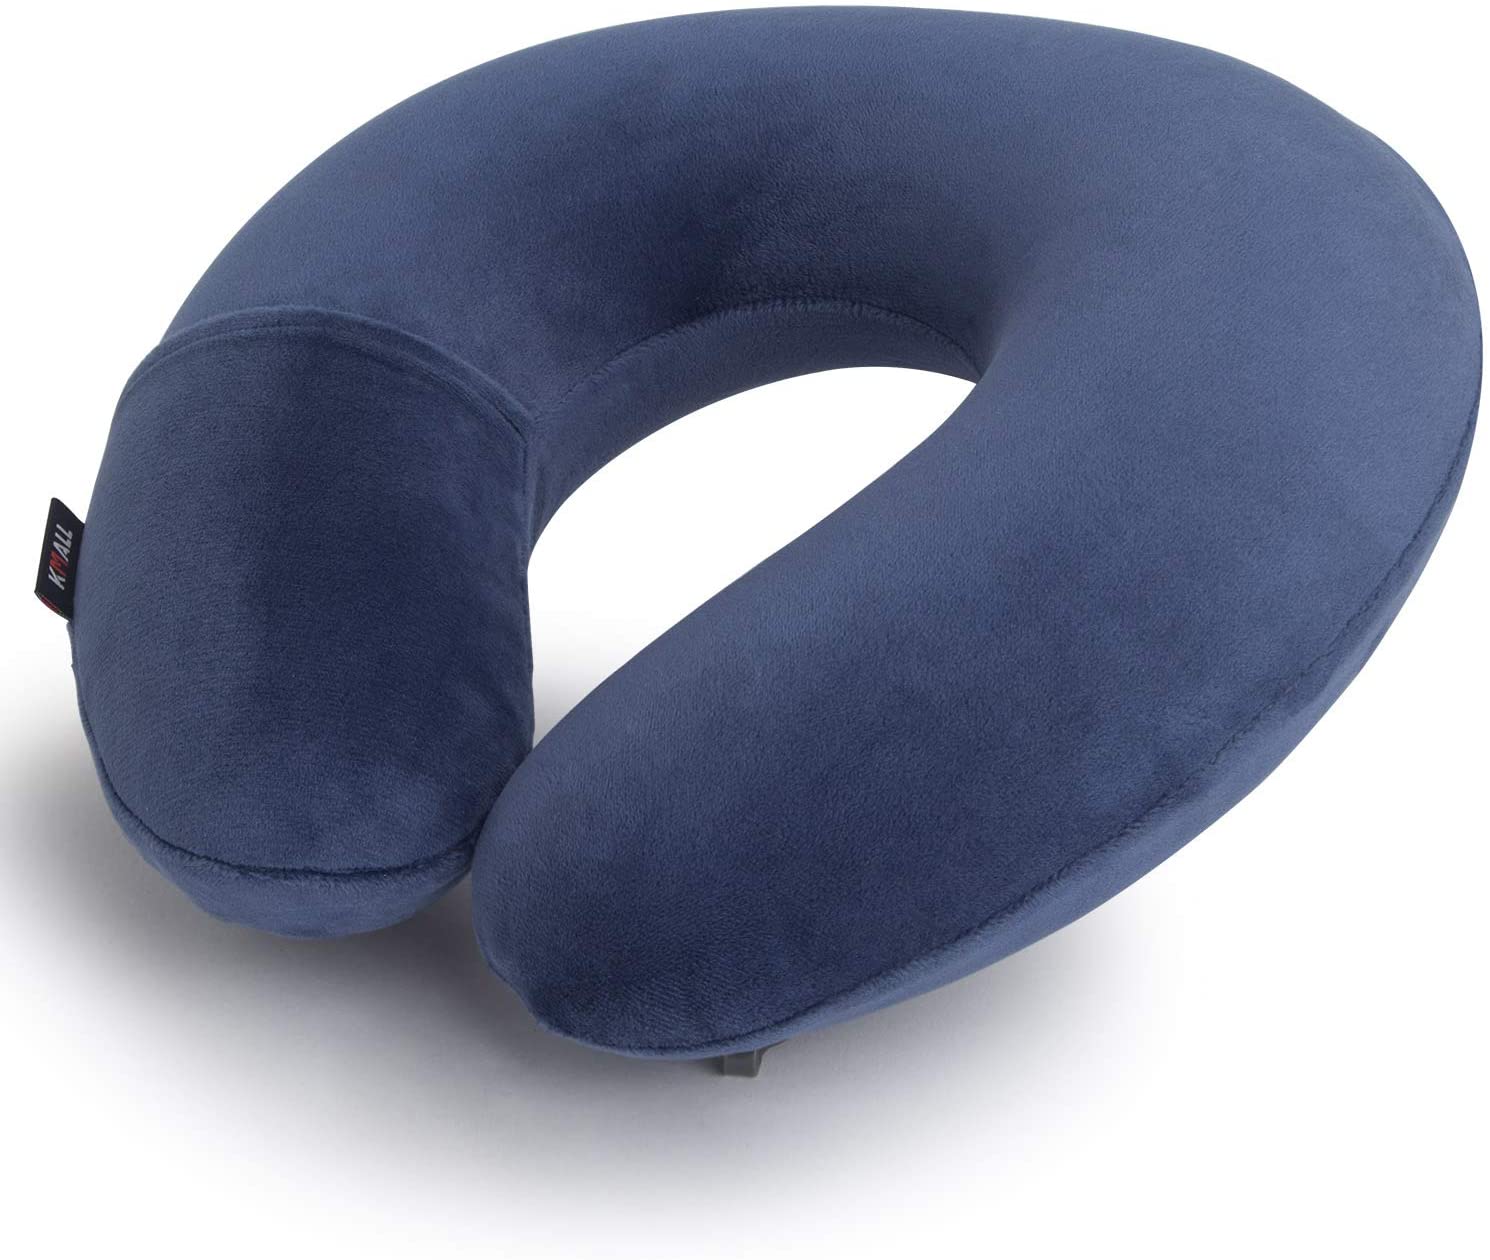 Variety of the travel neck pillow